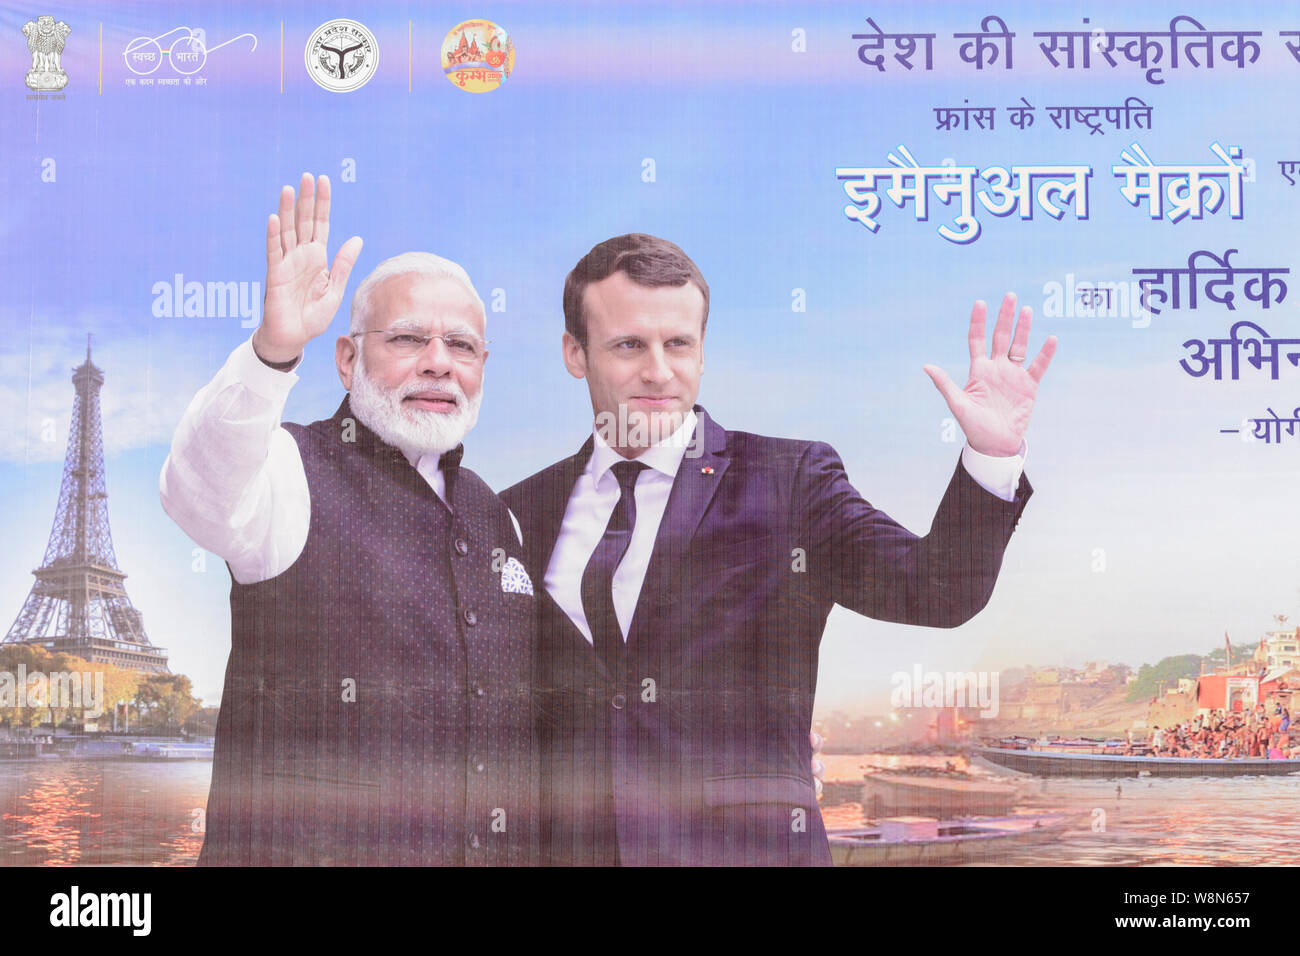 Poster publicising the meeting between Indian Prime Minister Modi and French President Macron in Varanasi on 12 March 2018, Varanasi, India Stock Photo